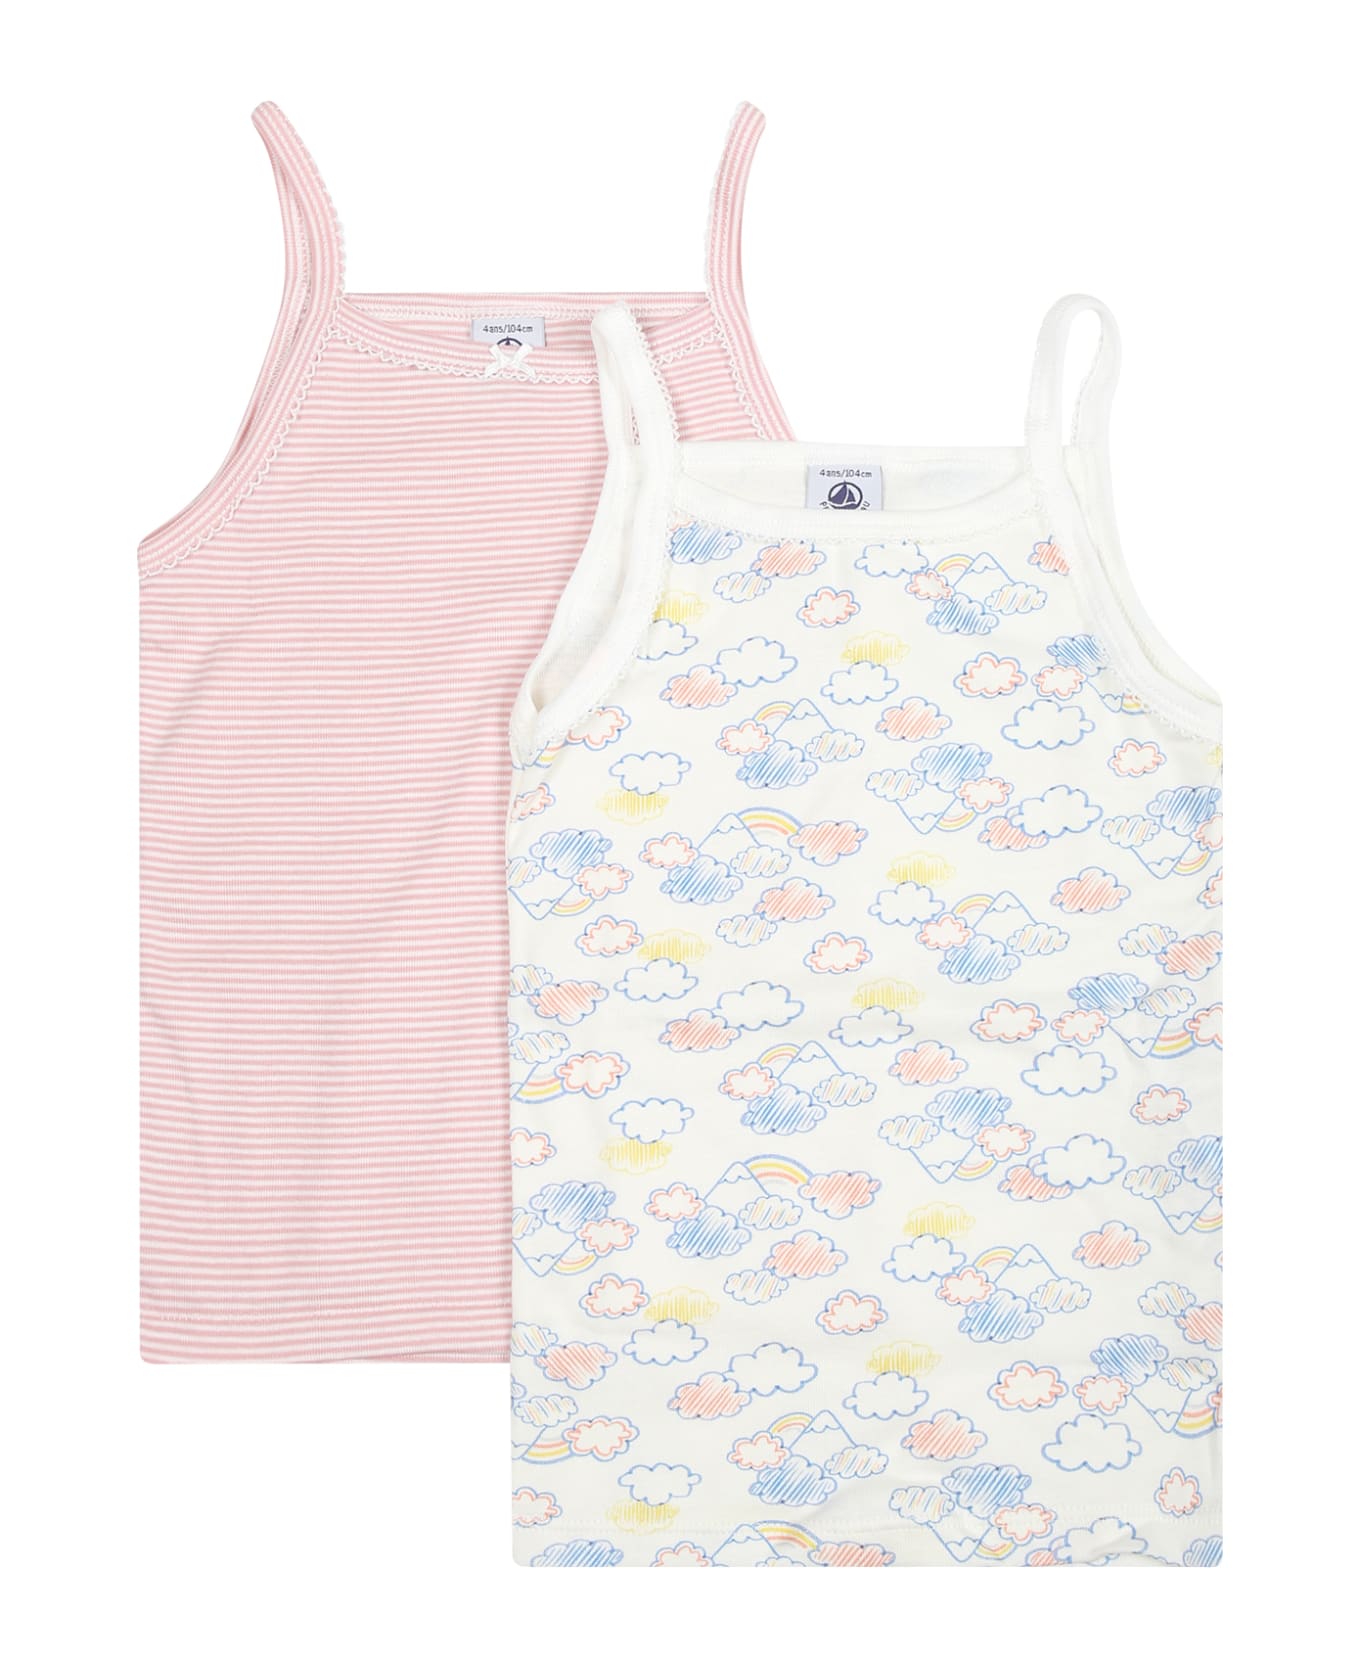 Petit Bateau Multicolor Set For Girl With Print And Stripes - Multicolor